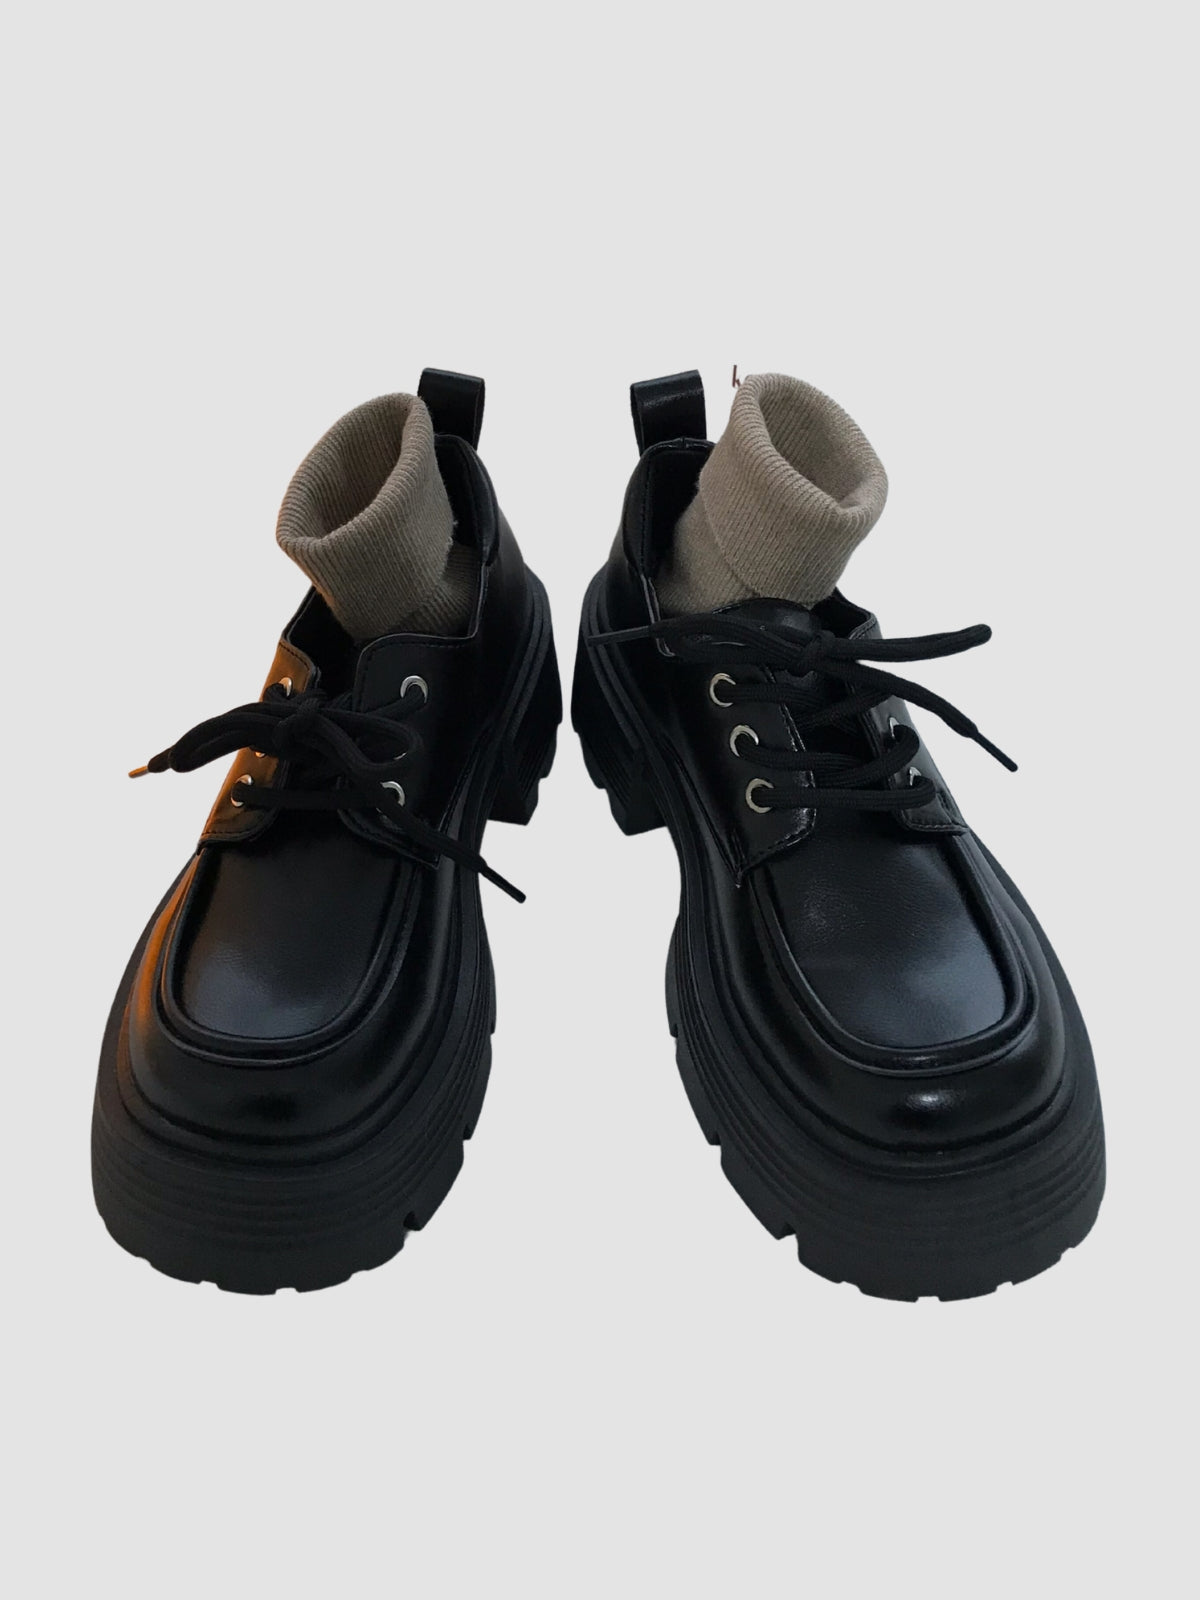 WLS Thick Soled Leather Women Retro Shoes